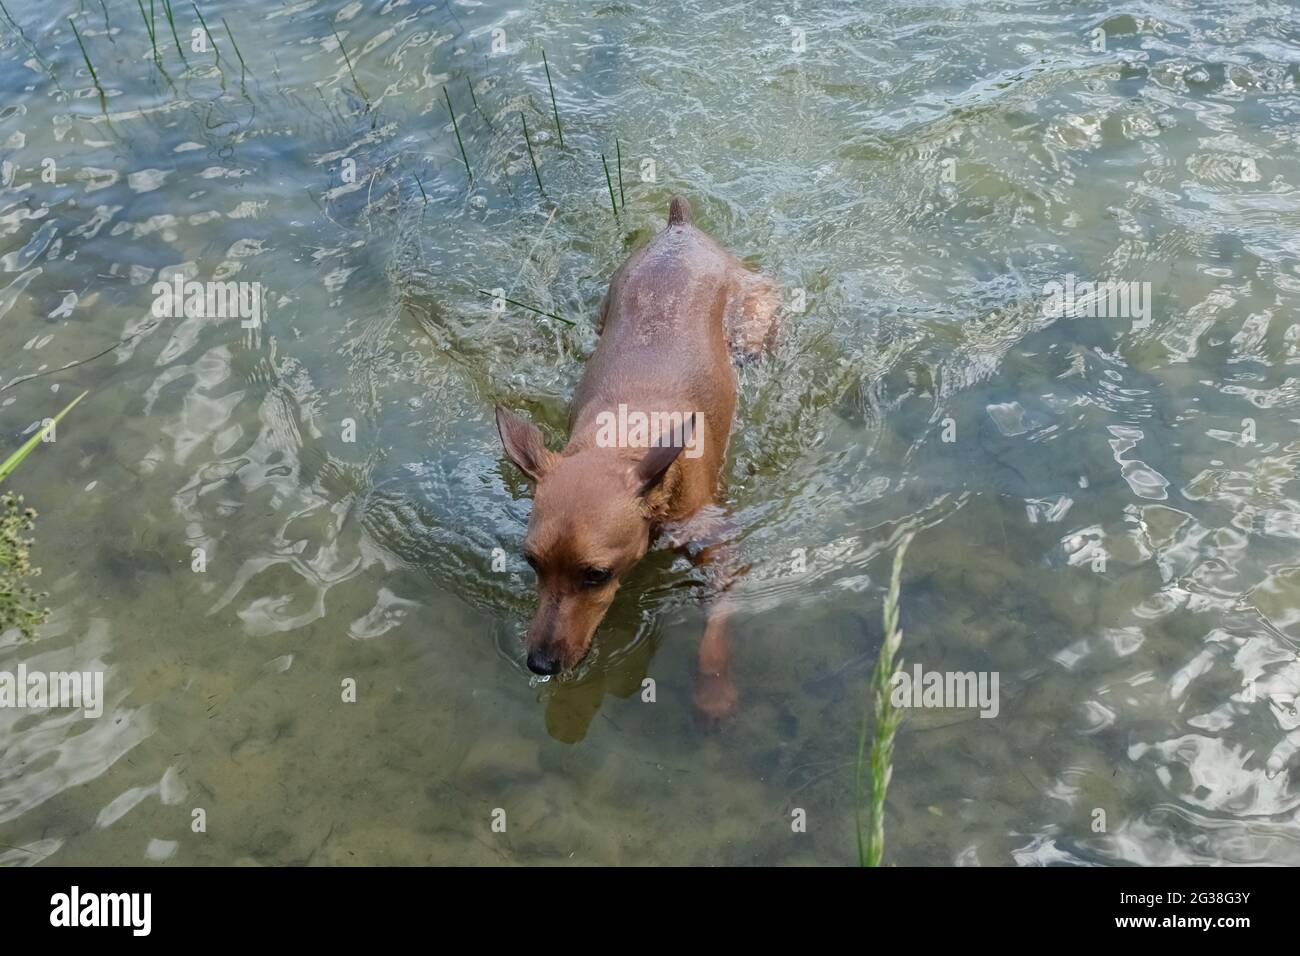 Dwarf mini-pinscher on a walk, dog on a walk in nature, portrait of a dwarf pinscher close-up. The dog swims in the water. Stock Photo